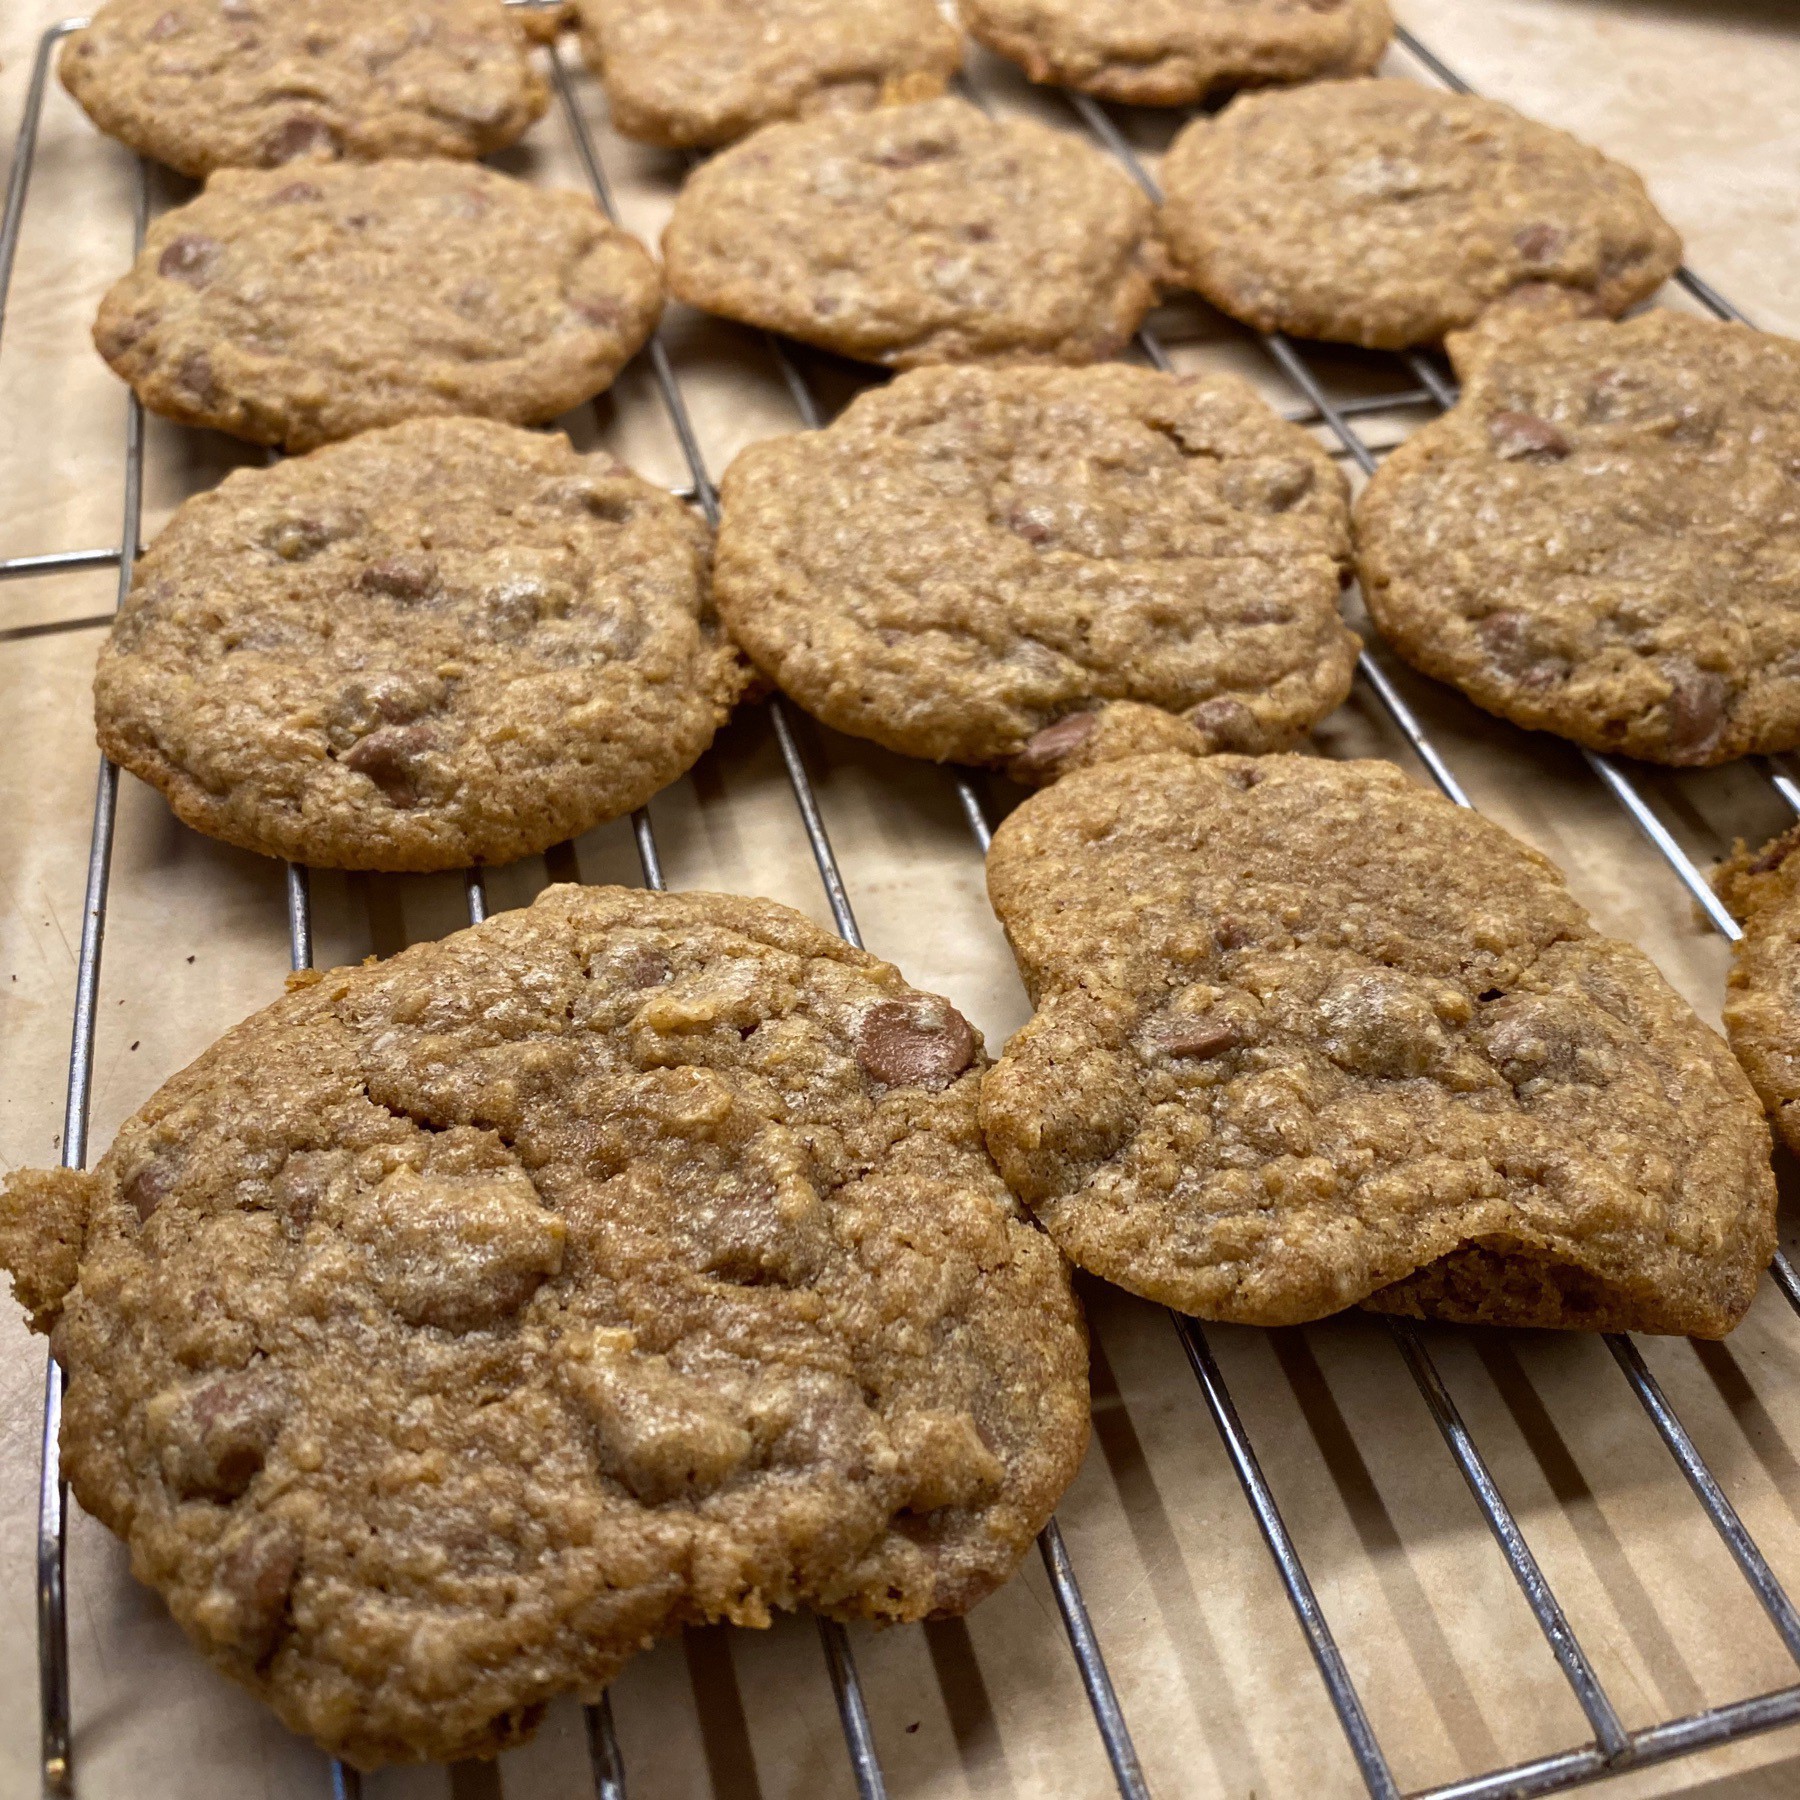 Oatmeal chocolate chio cookies cooling on wire rack.